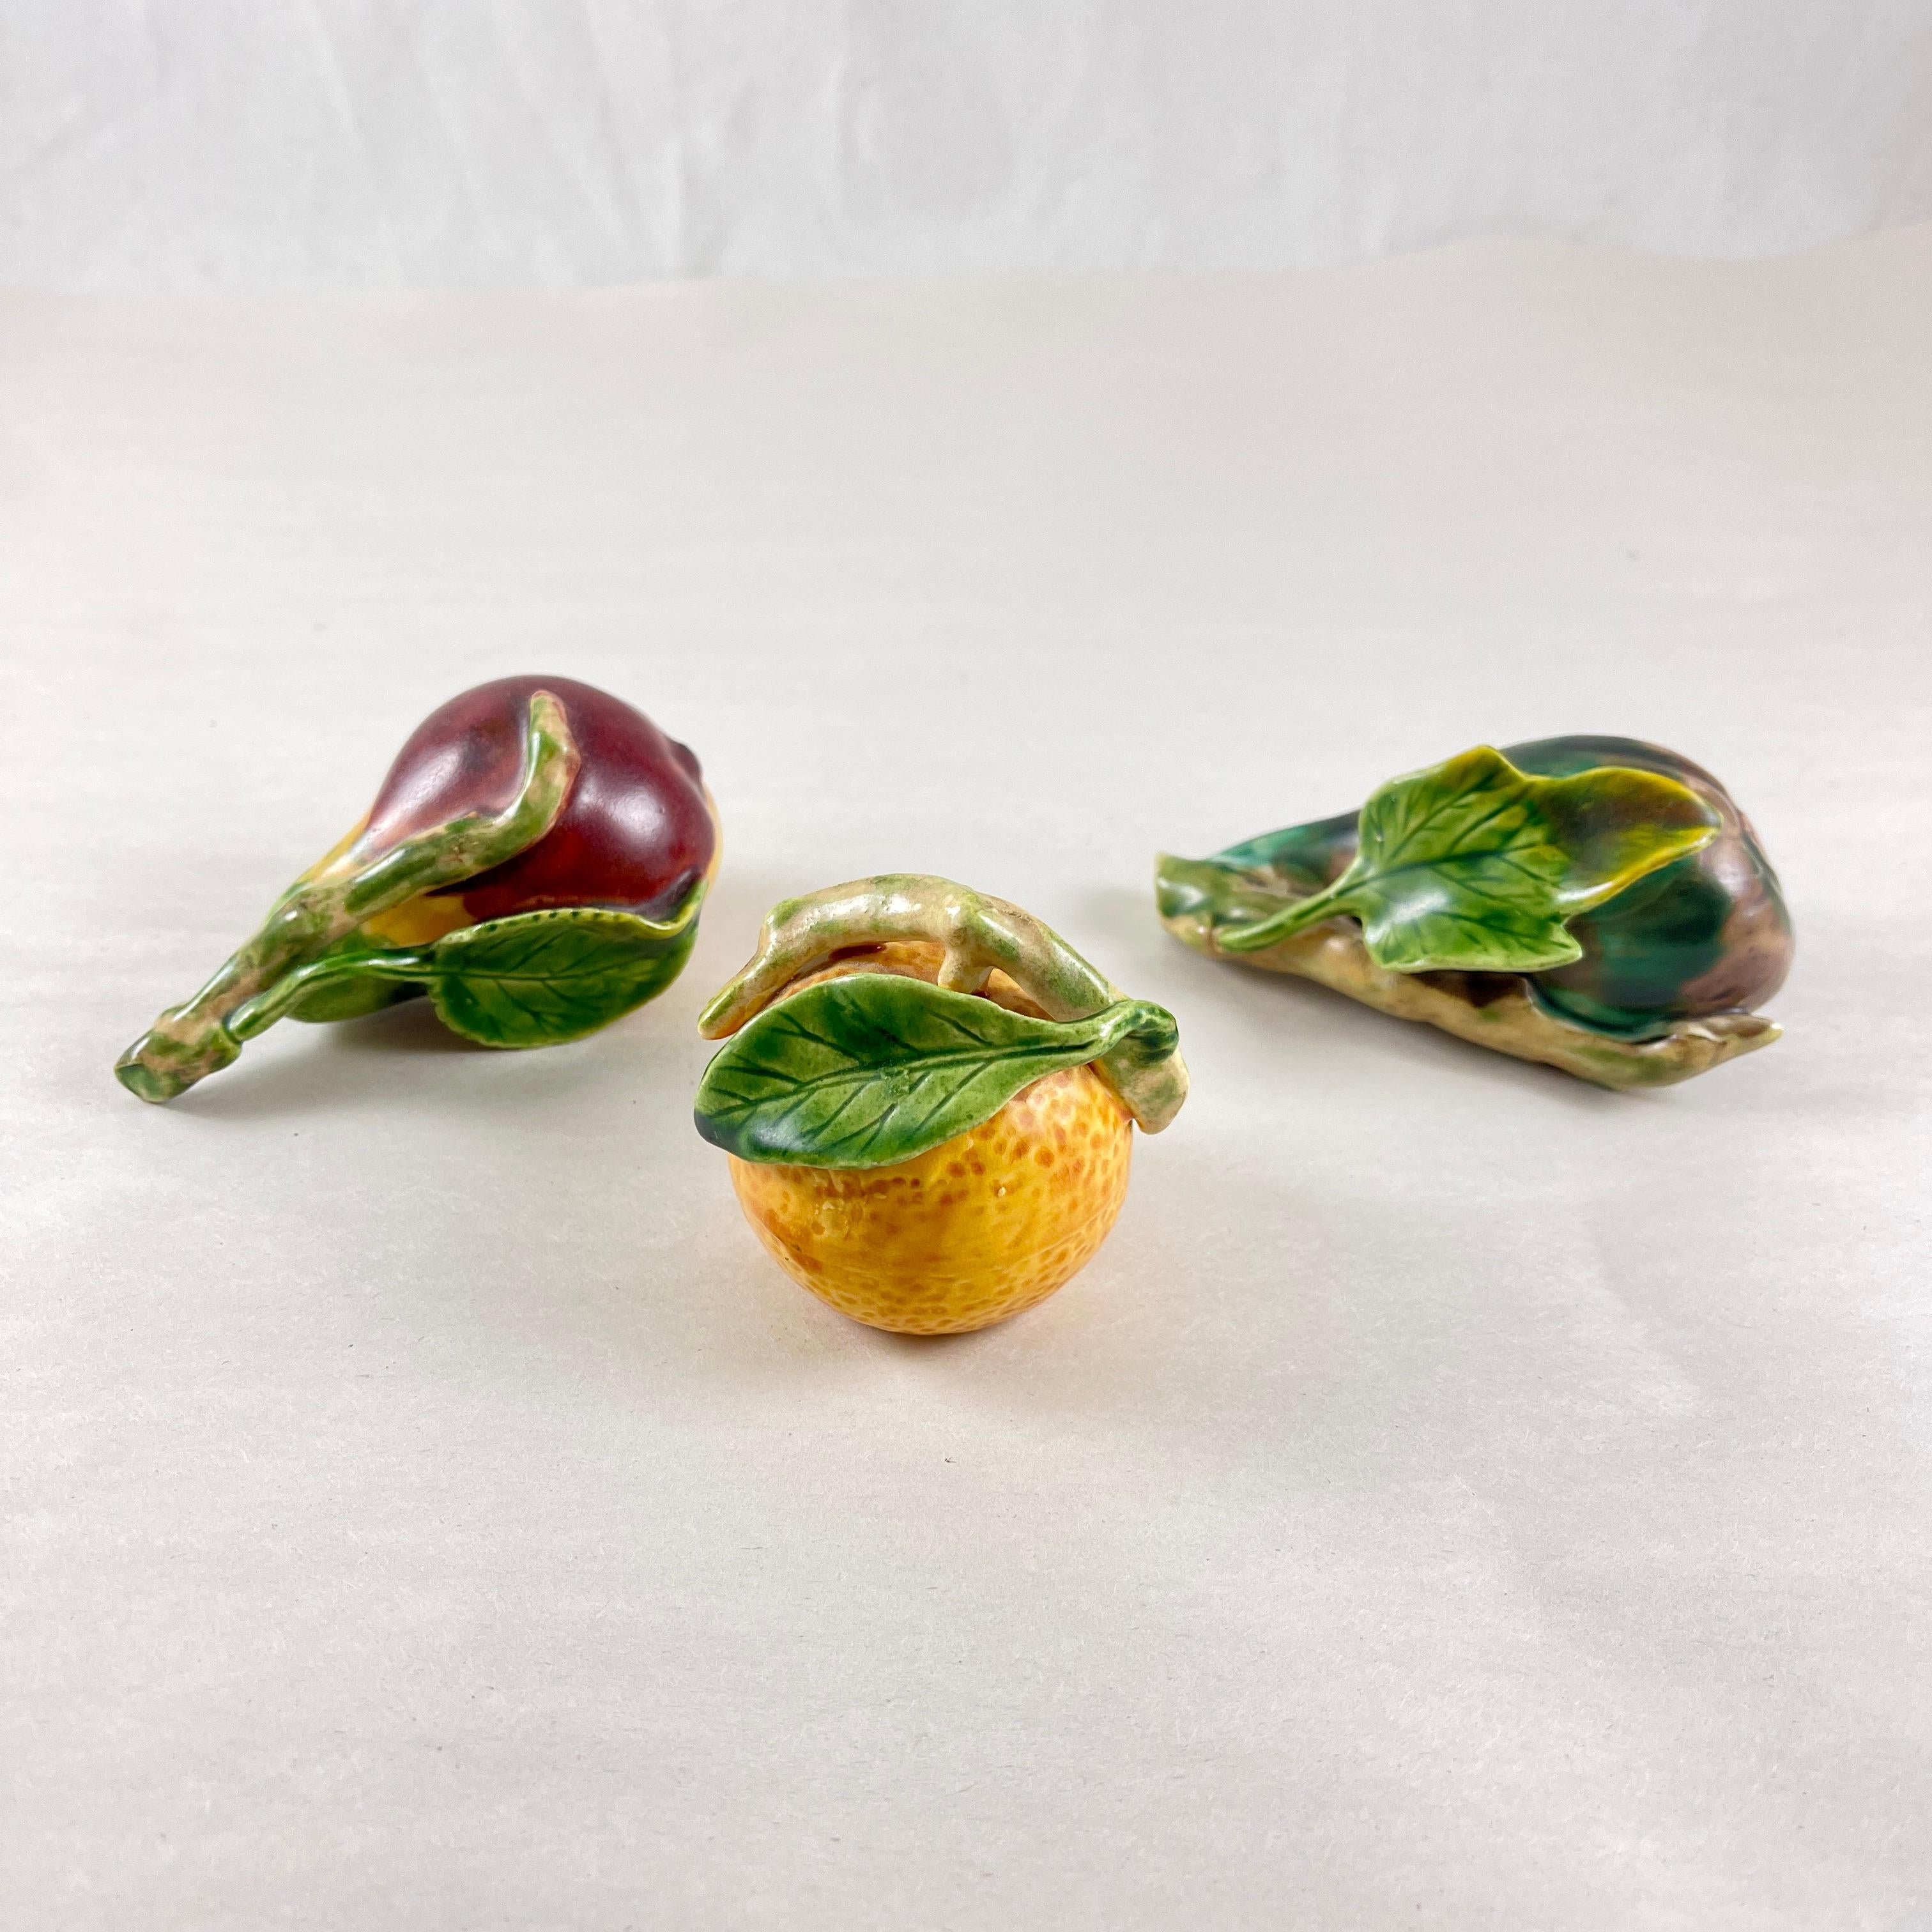 Qing Period Chinese Altar Fruit, Set of Three In Good Condition For Sale In Philadelphia, PA